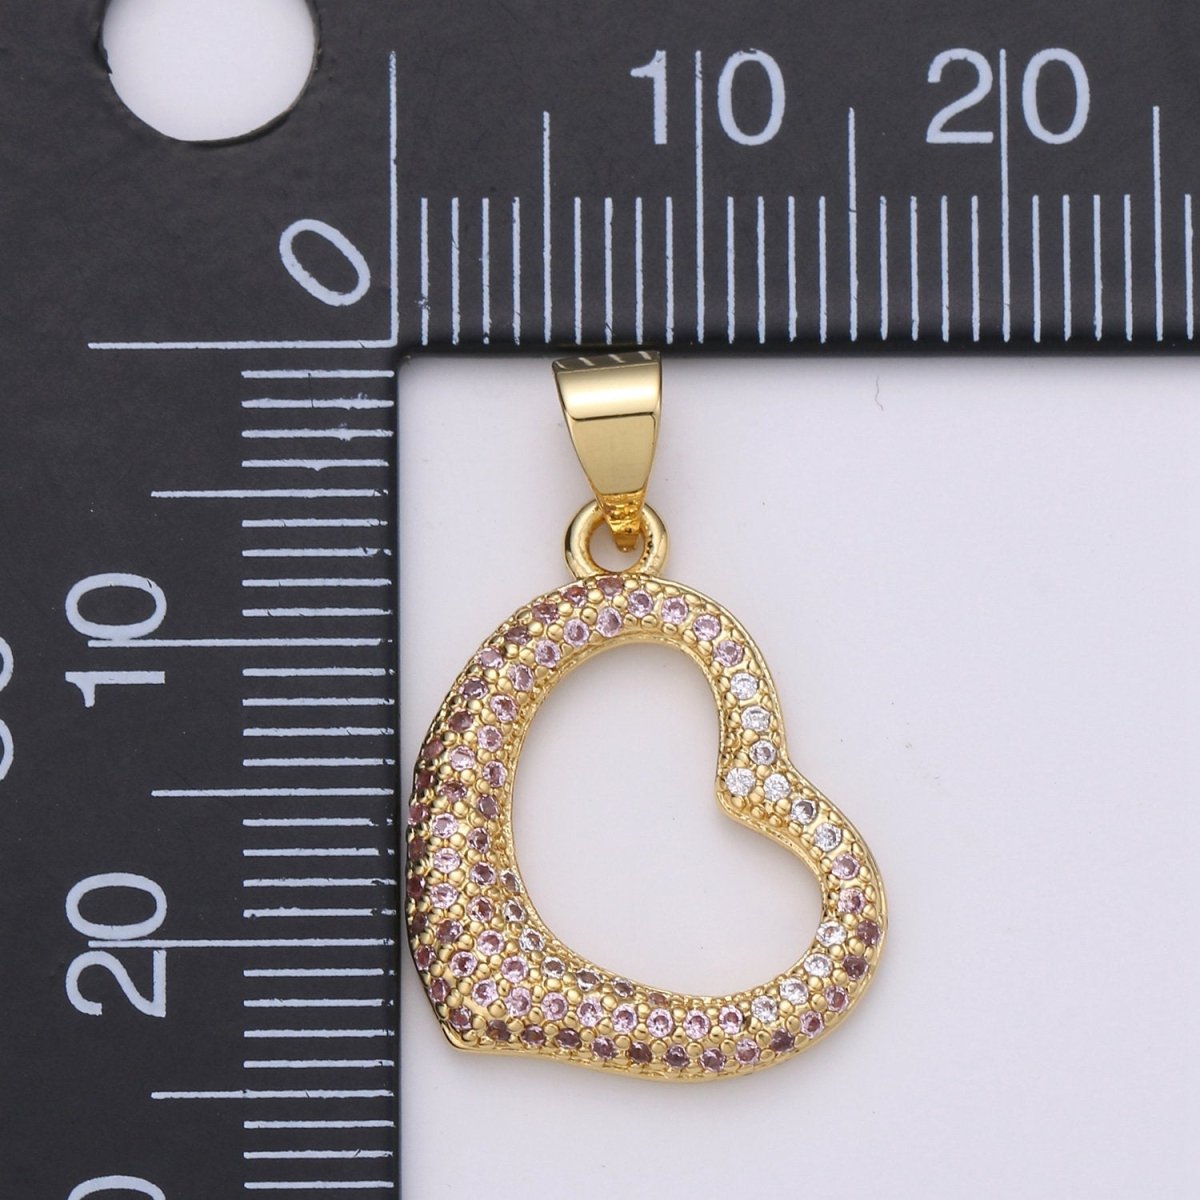 24k Gold Filled Micro Pave CZ Heart Pendant Charm, Open Heart Micro Pave CZ Pendant Charm, Gold Filled Pendant, For DIY Jewelry I-798 - DLUXCA